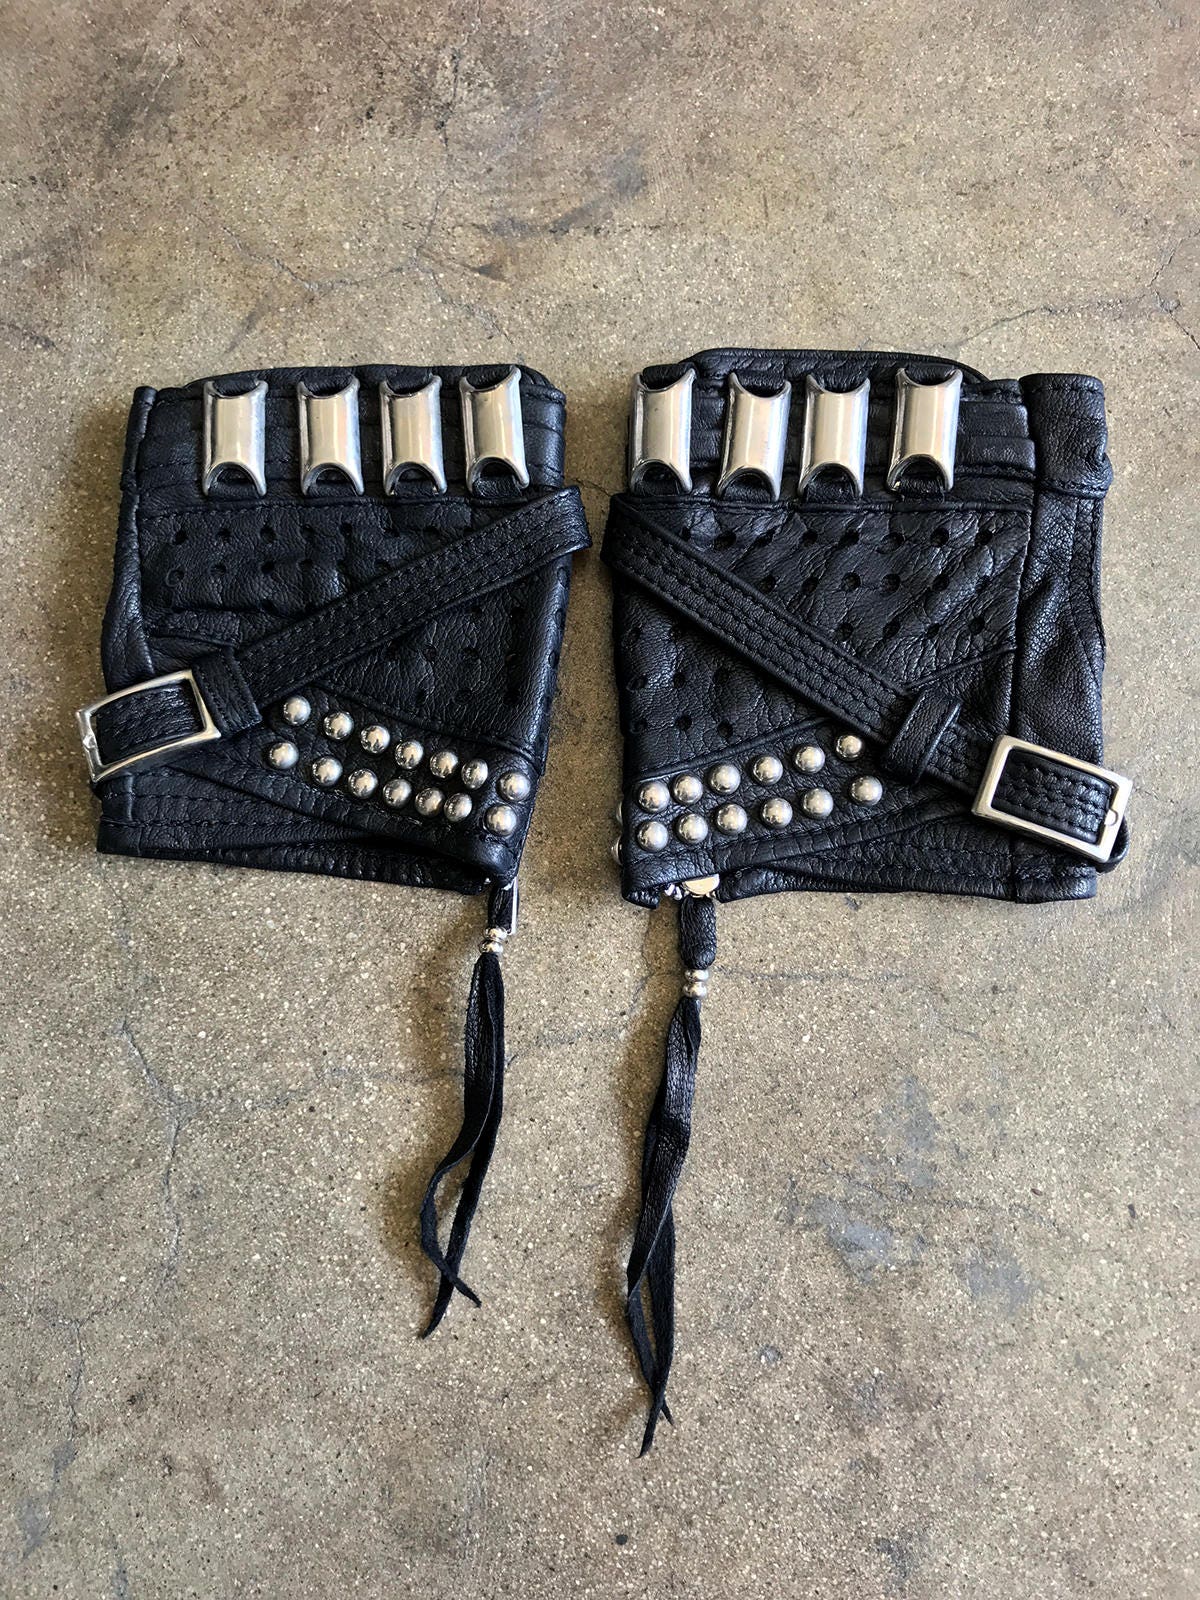 KNUCKLE DUSTER  Black Leather Fingerless Unisex Motorcycle Driving Gloves